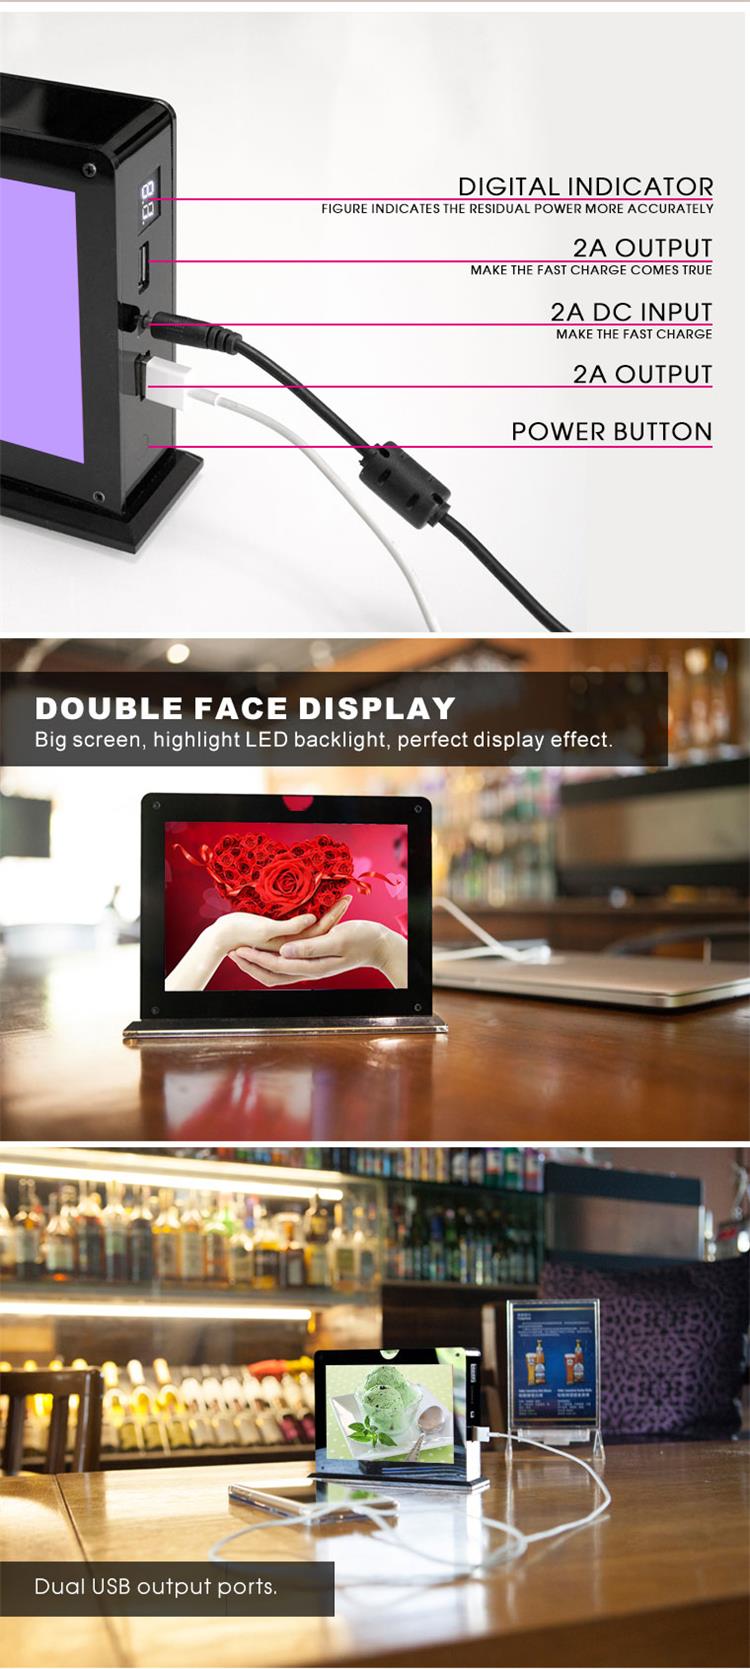 double-face advertising charger.jpg